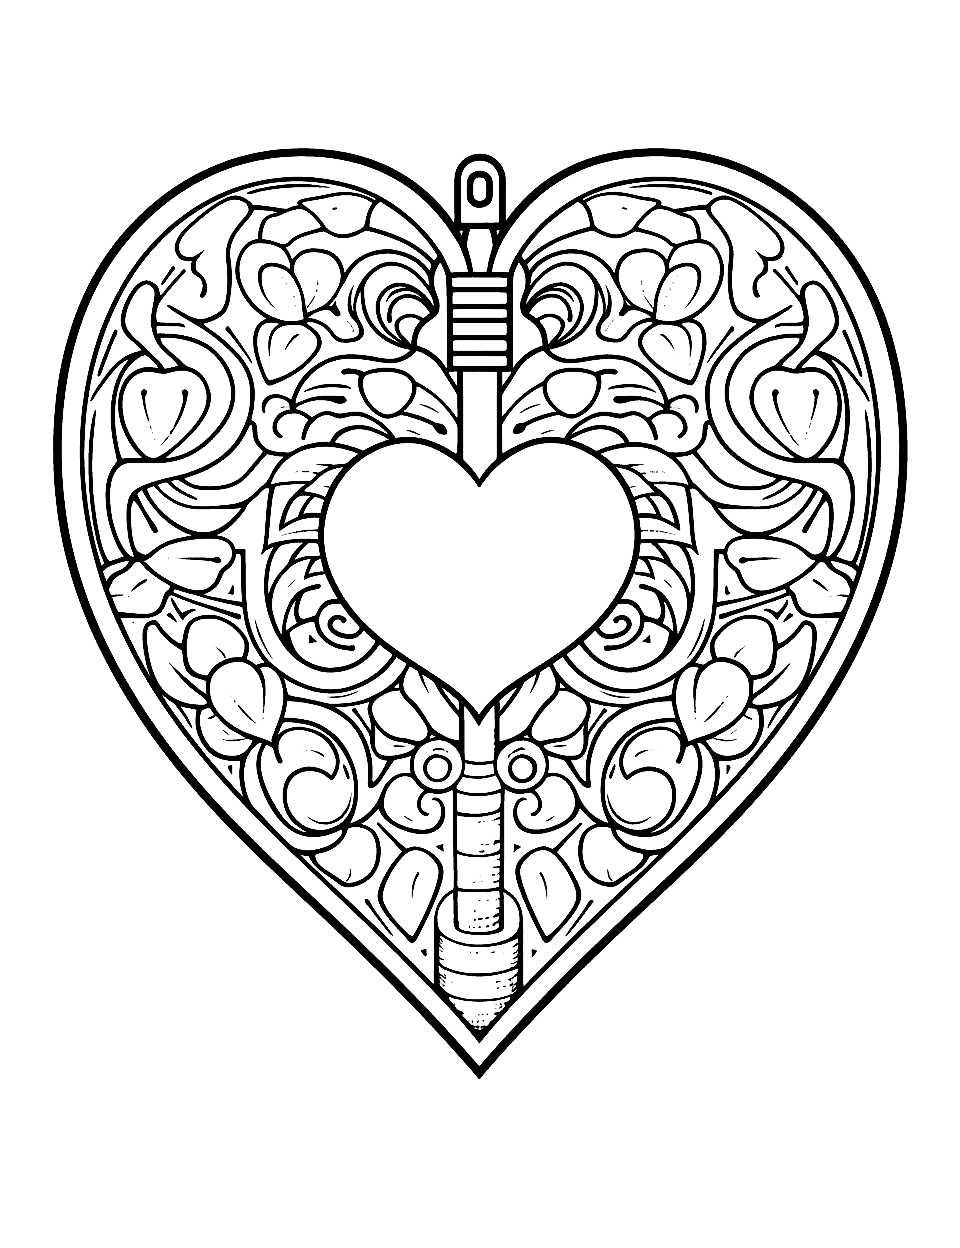 Heart coloring pages free printable sheets